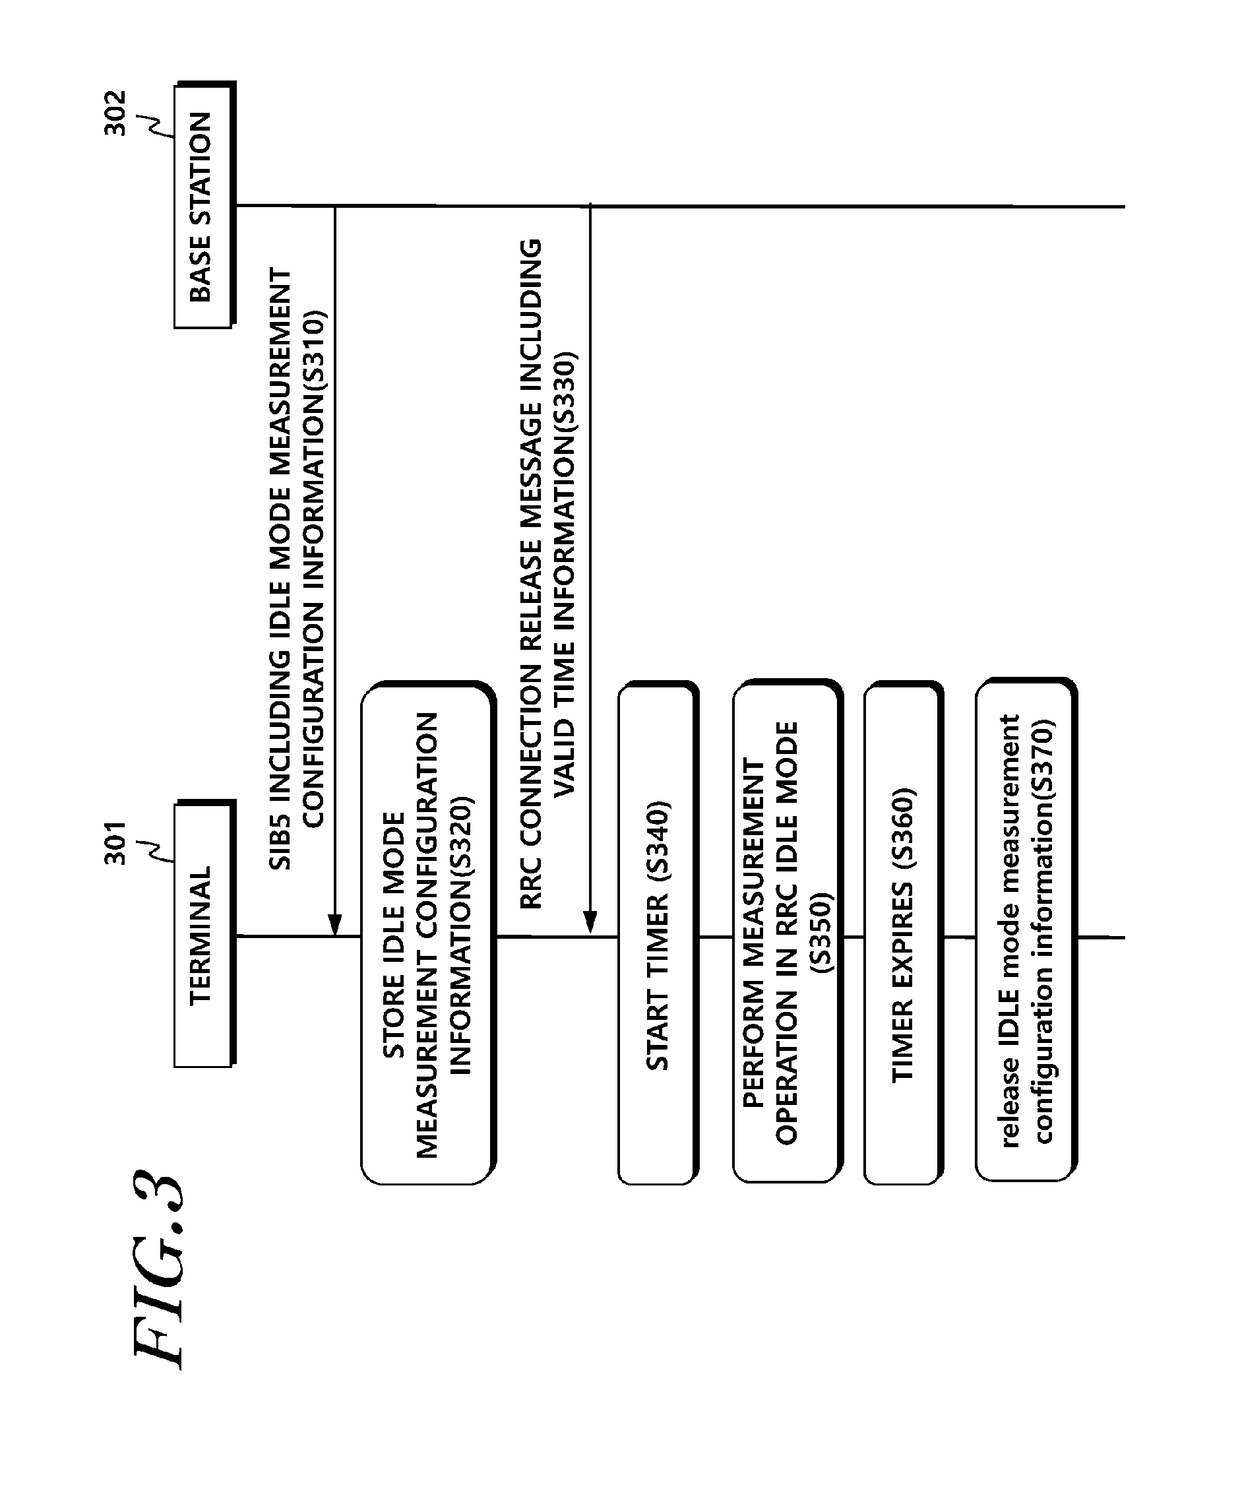 Methods of controlling measurement process in rrc idle mode and apparatuses thereof